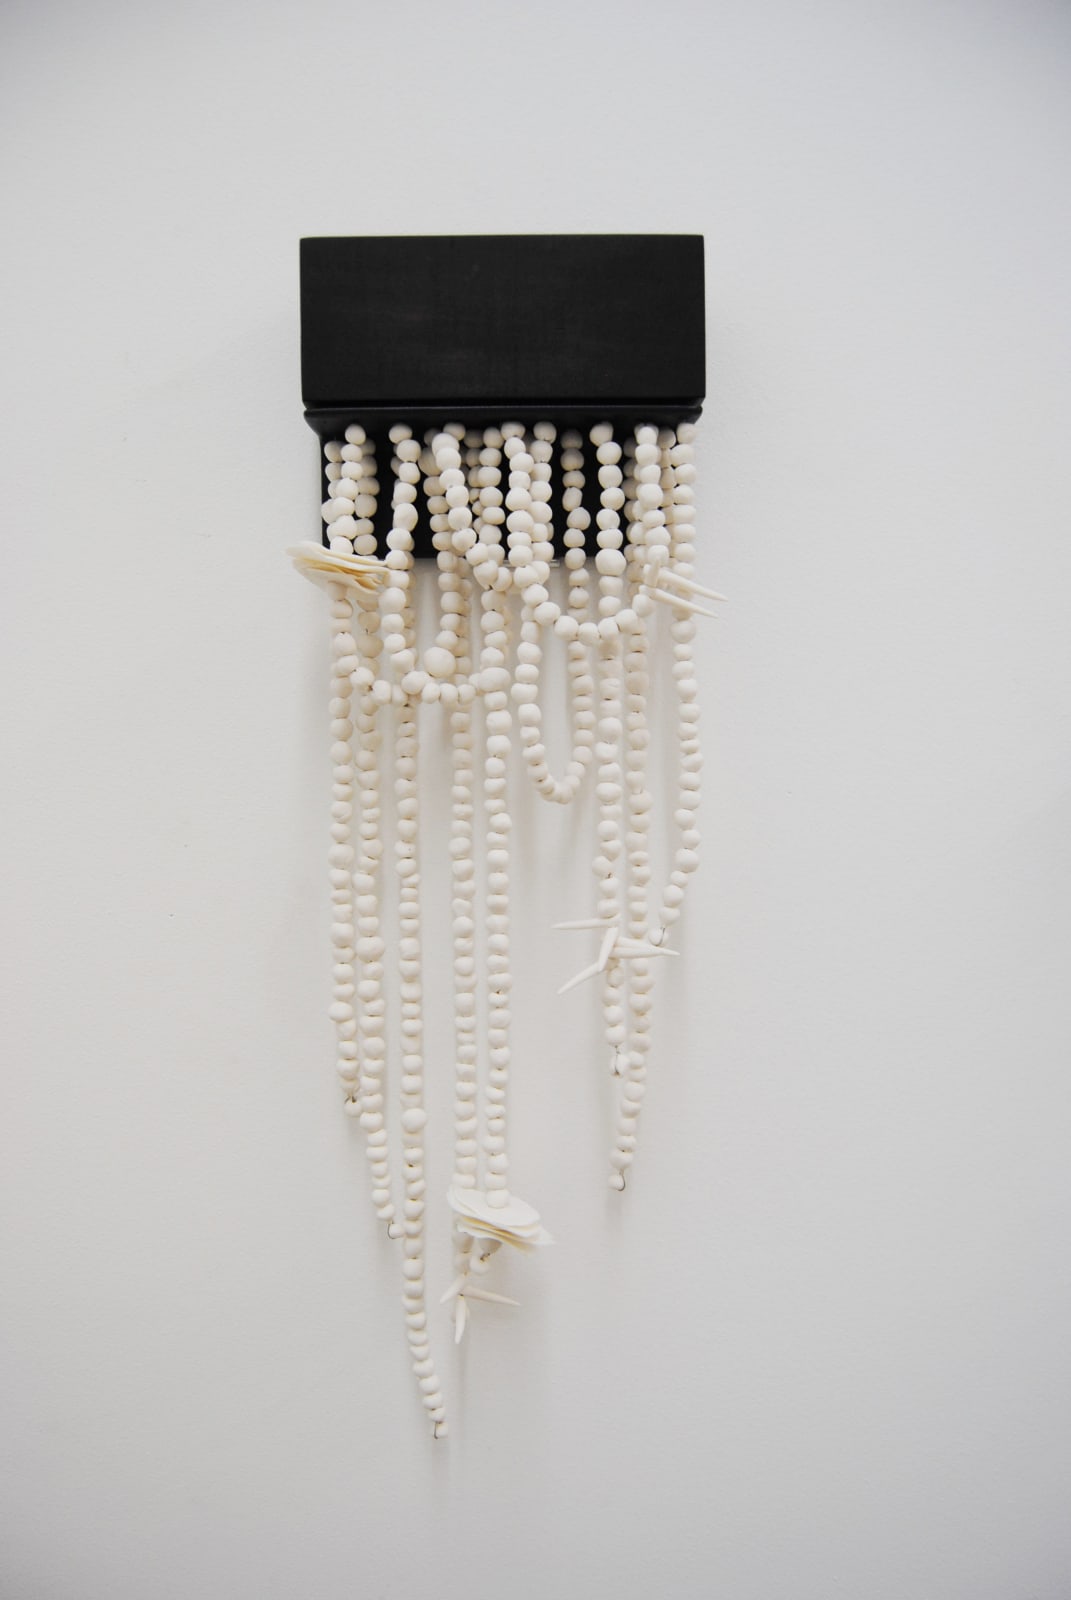 Brooke Armstrong, Looping Intention | Radius Gallery